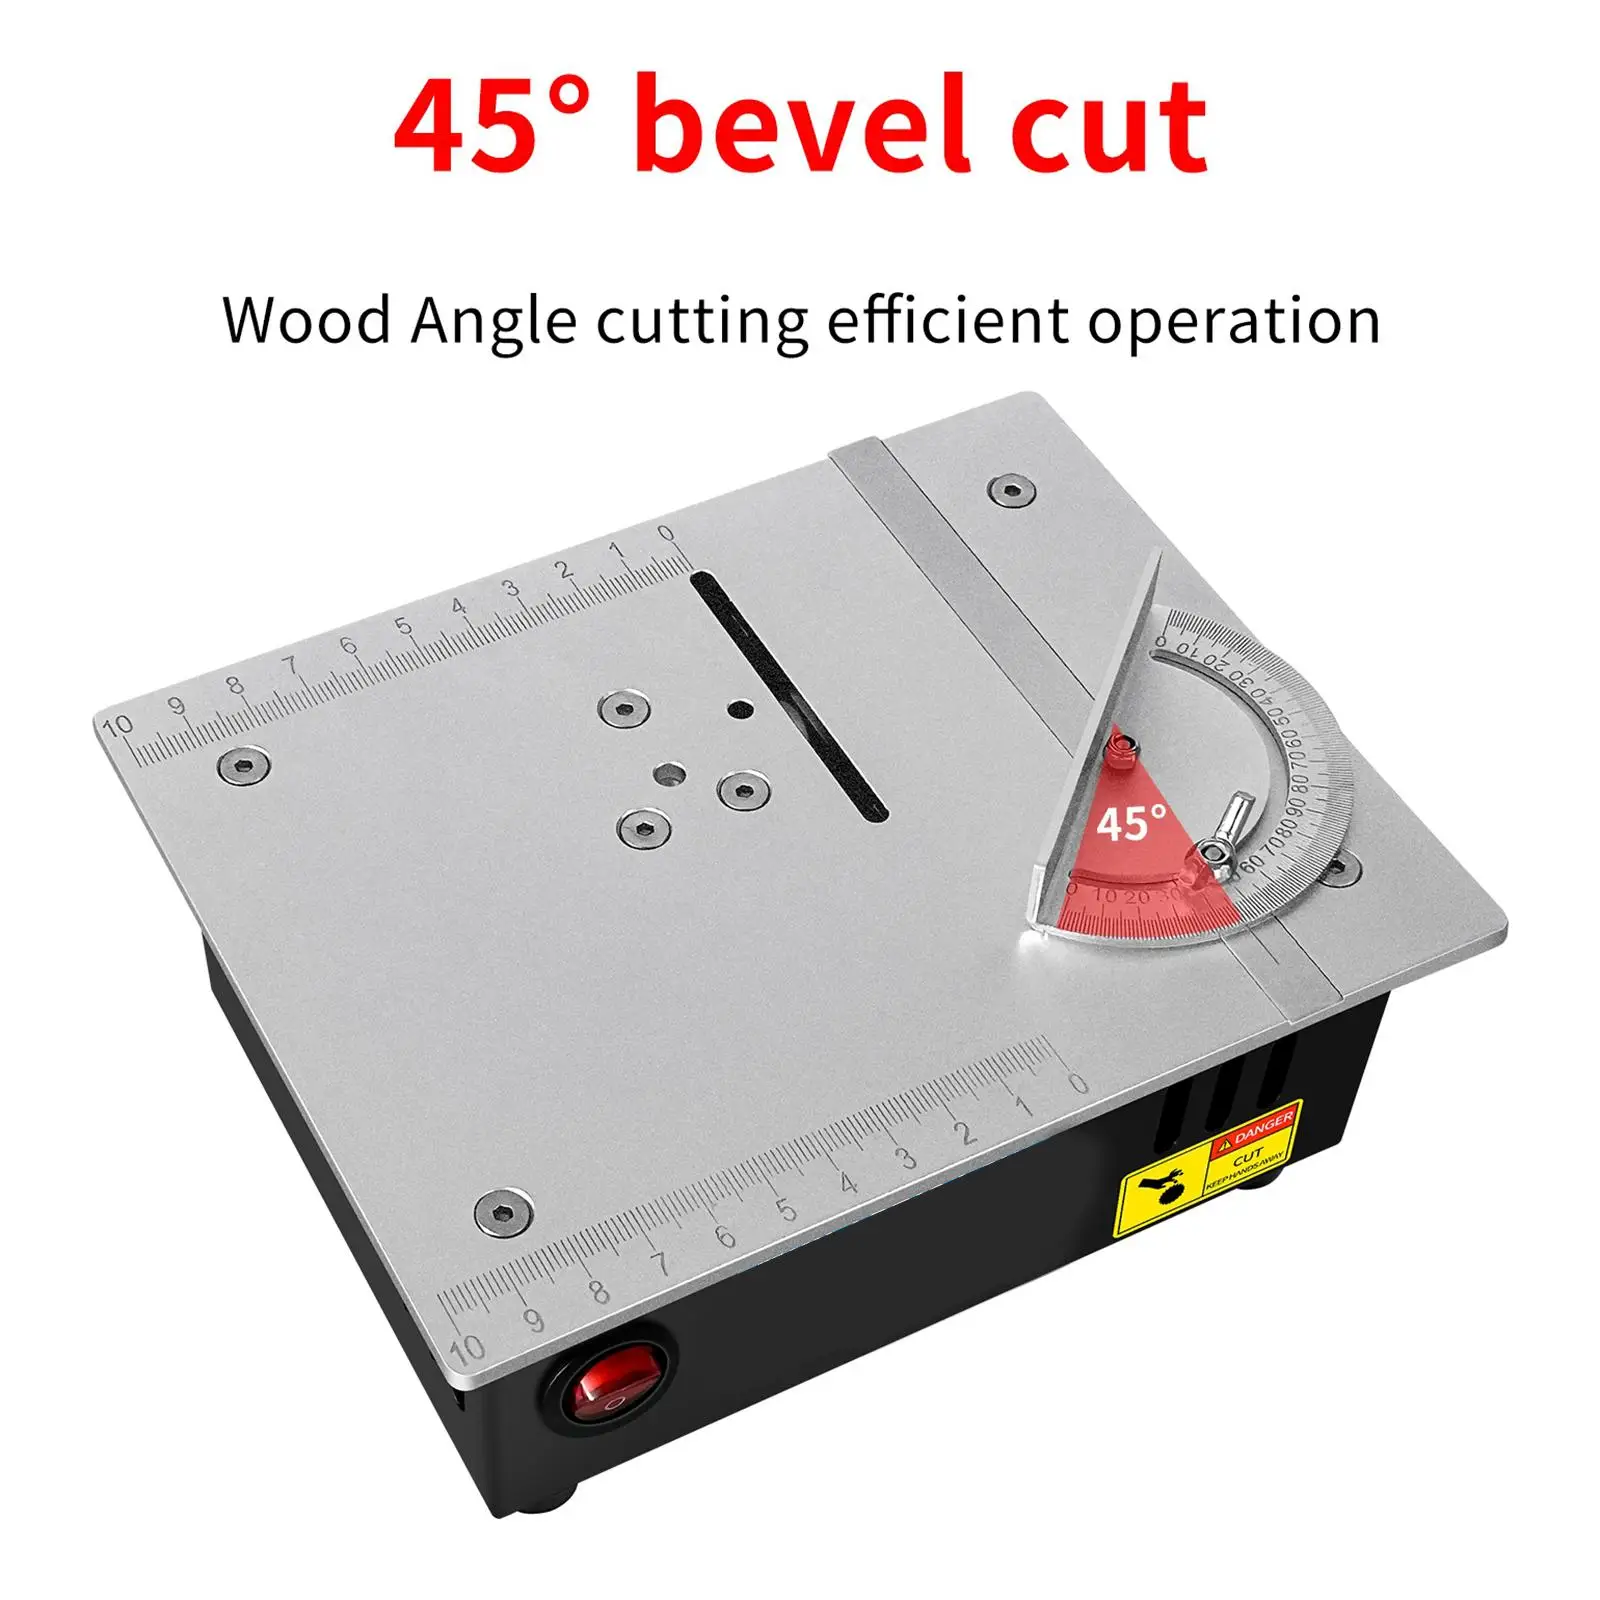 Small Precision Hobby Table Saw Portable Precision Table Saw Mini Table Saw for Handicraft Workshop Small Woodworking Projects